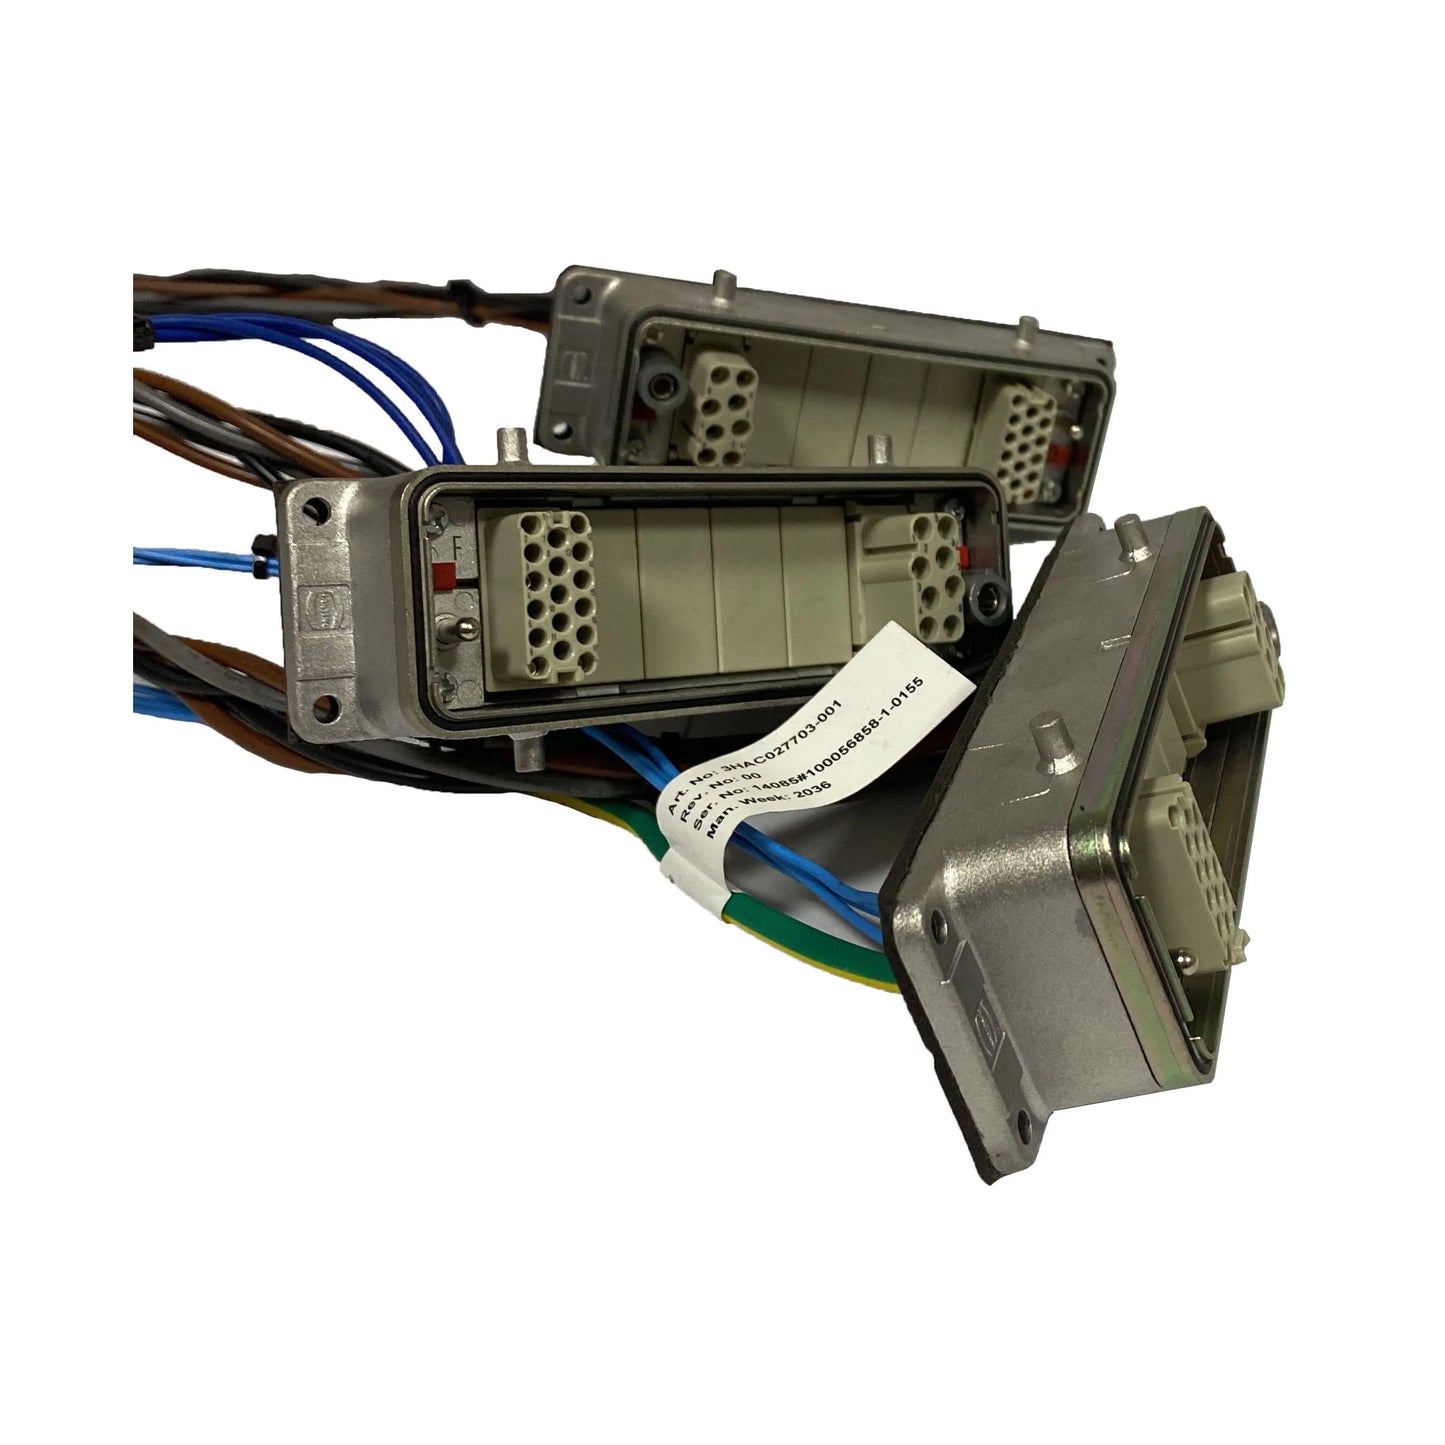 Harness Drive Unit for Industrial Robot Drive Cables